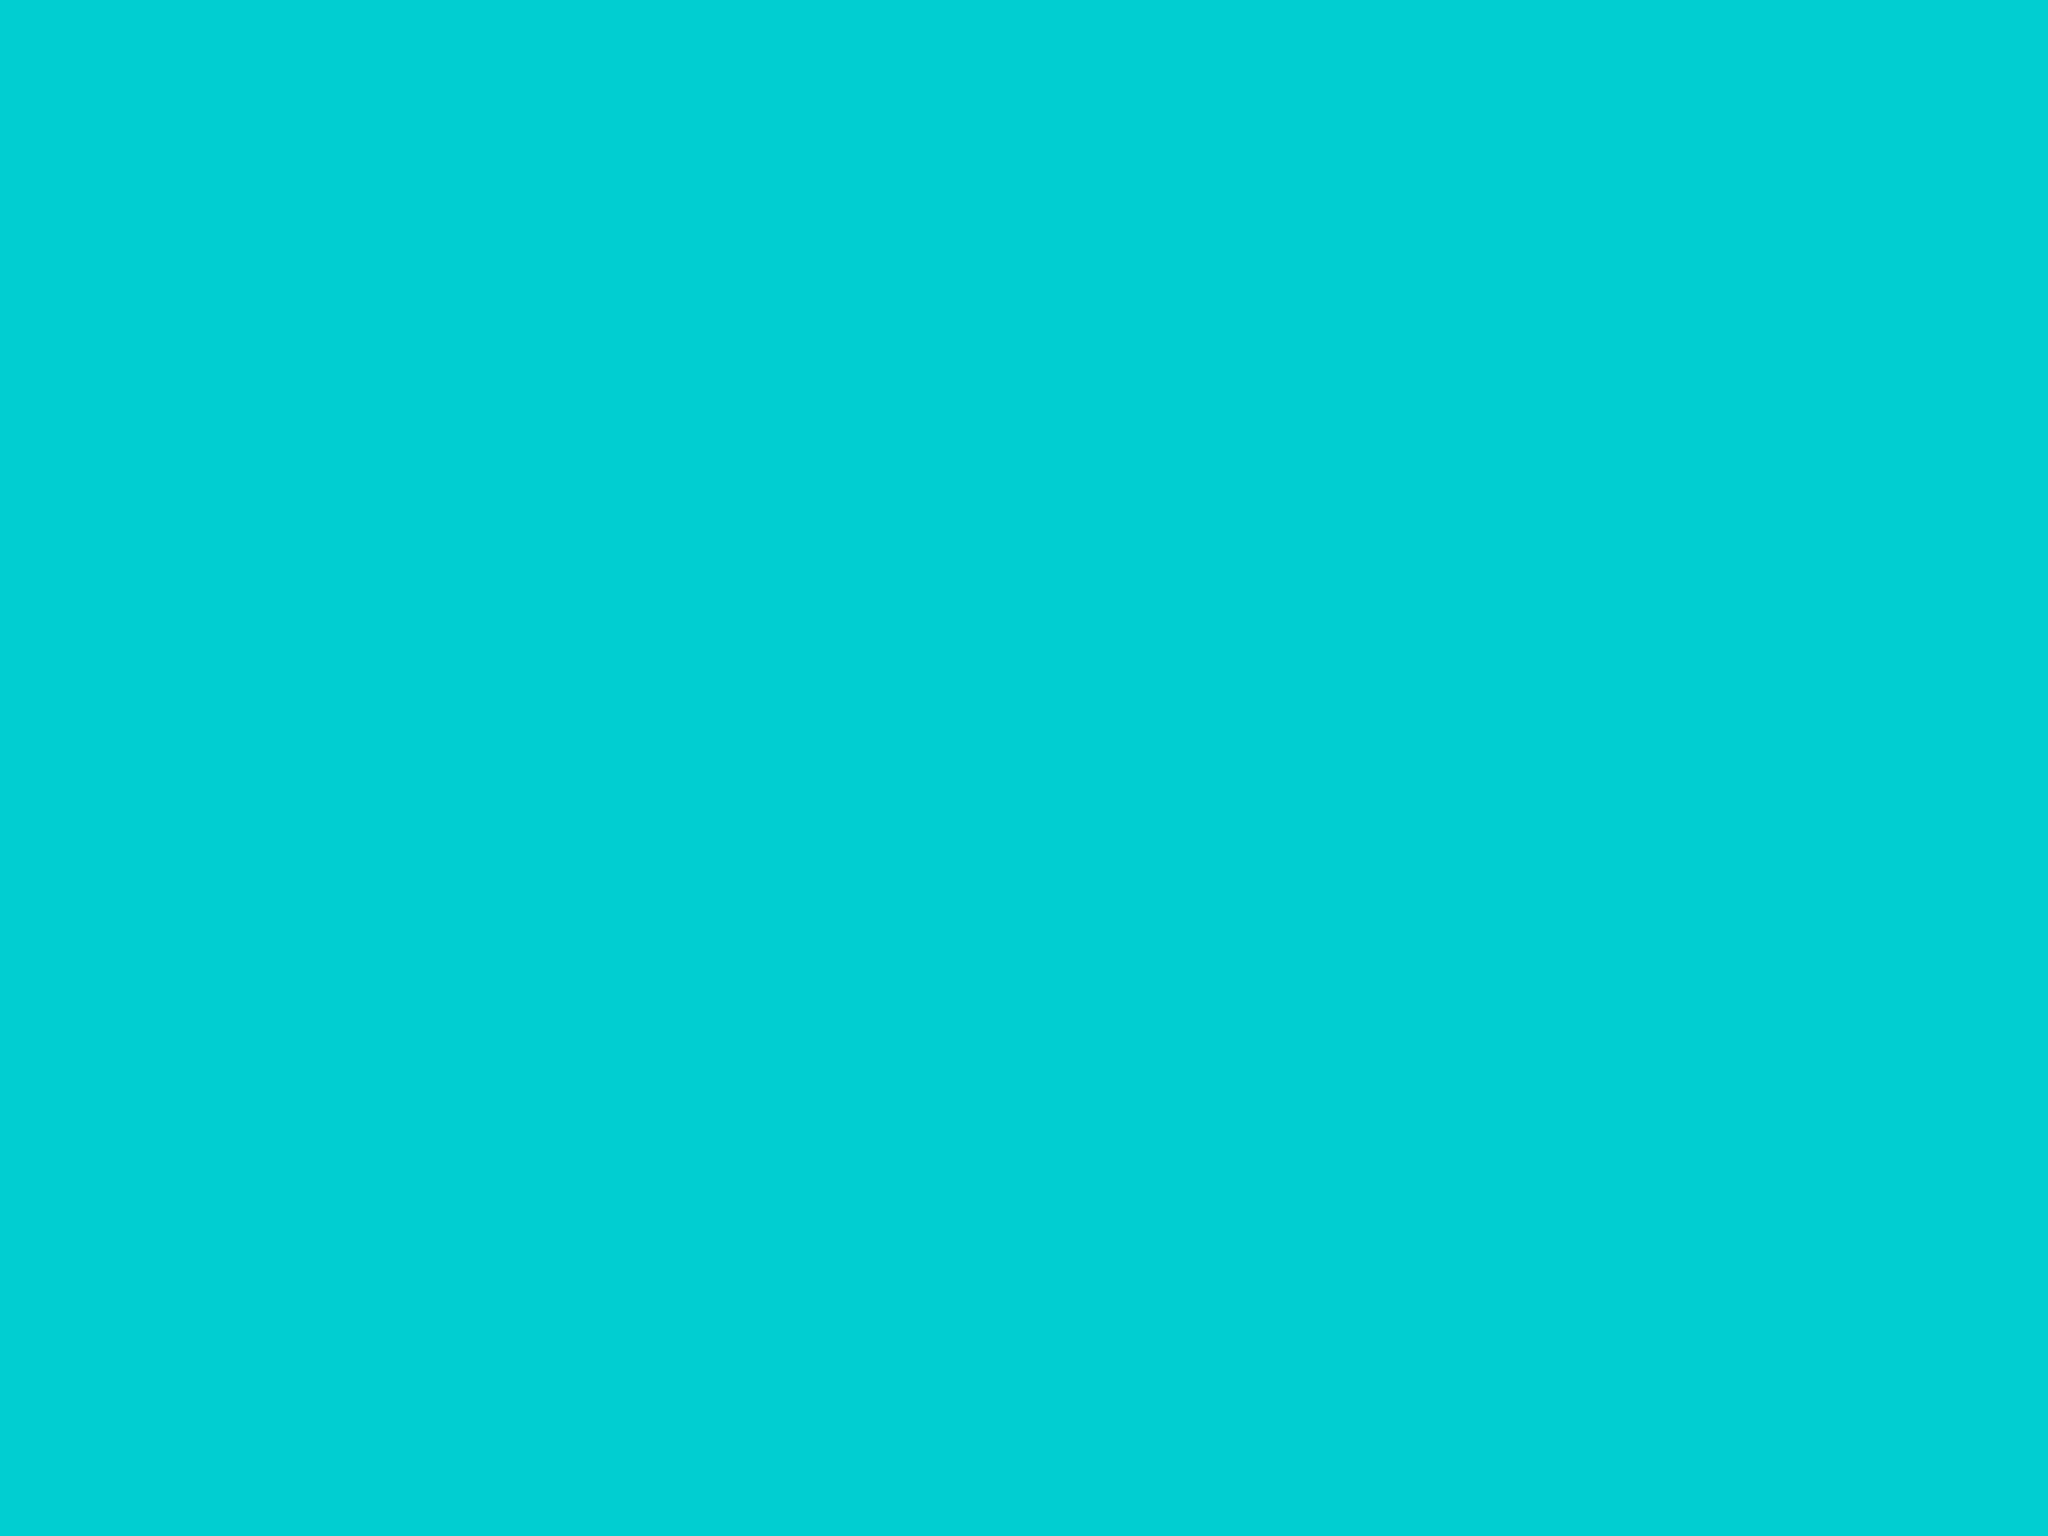 2048x1536 Dark Turquoise Solid Color Background
